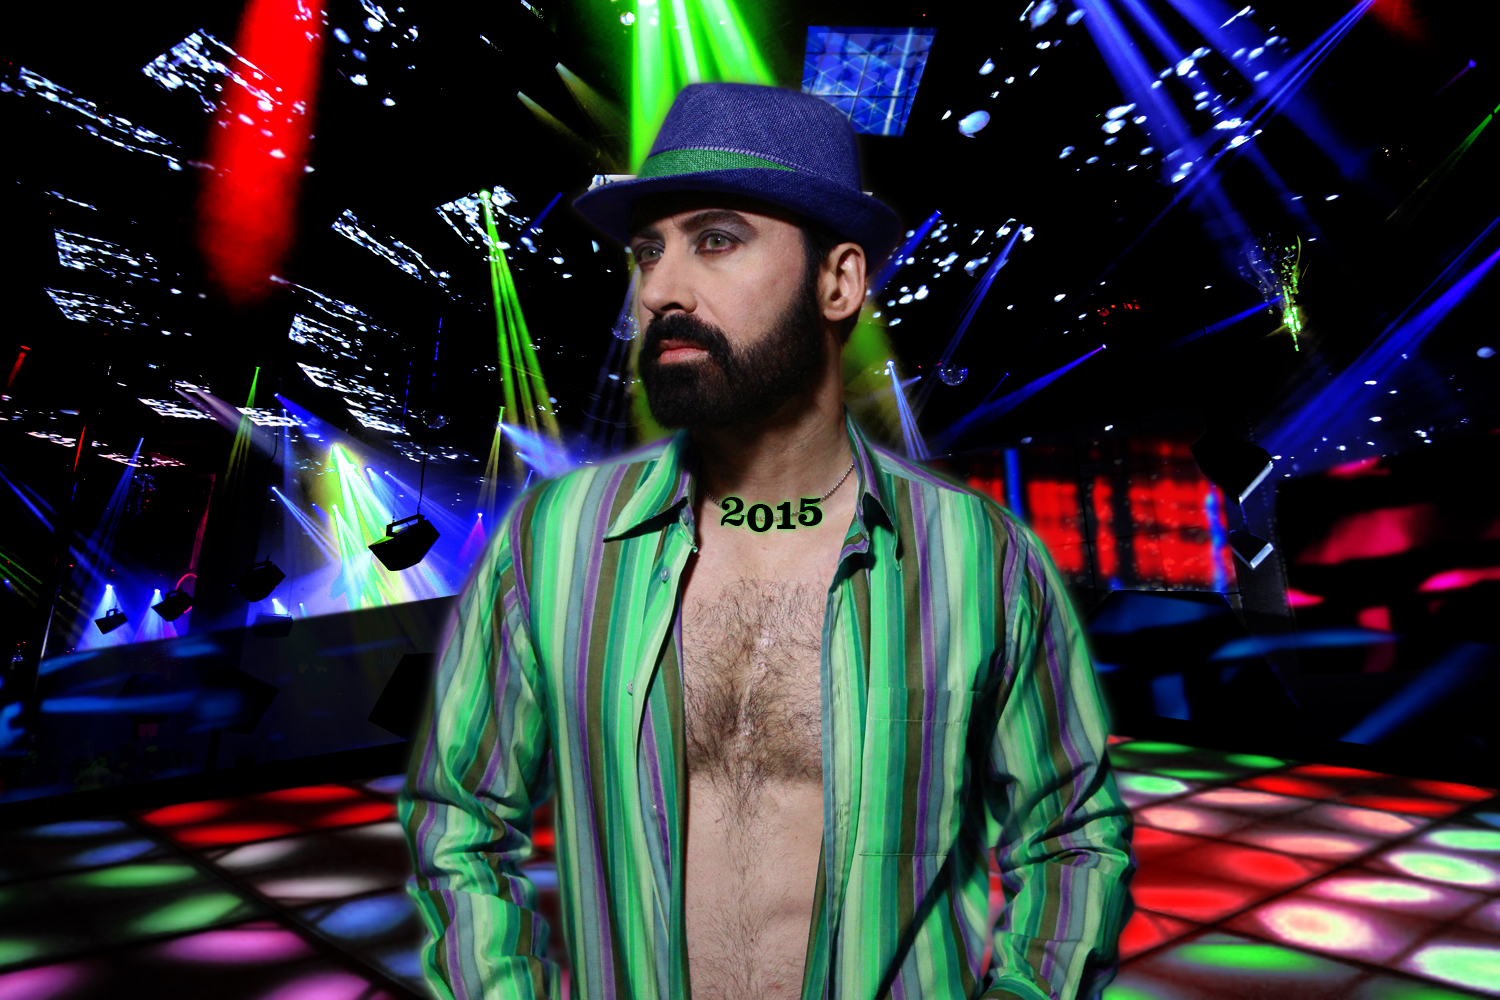 2014 is gone, 2015 is here so let's make this world a better place. Who's with me? #ShowTime #Dance #HappyNewYear #Celebration #PartyTime #2015WillBeBetter #MoonDazeTV #NewSeason #RealityShow #Beard #LifeIsGood